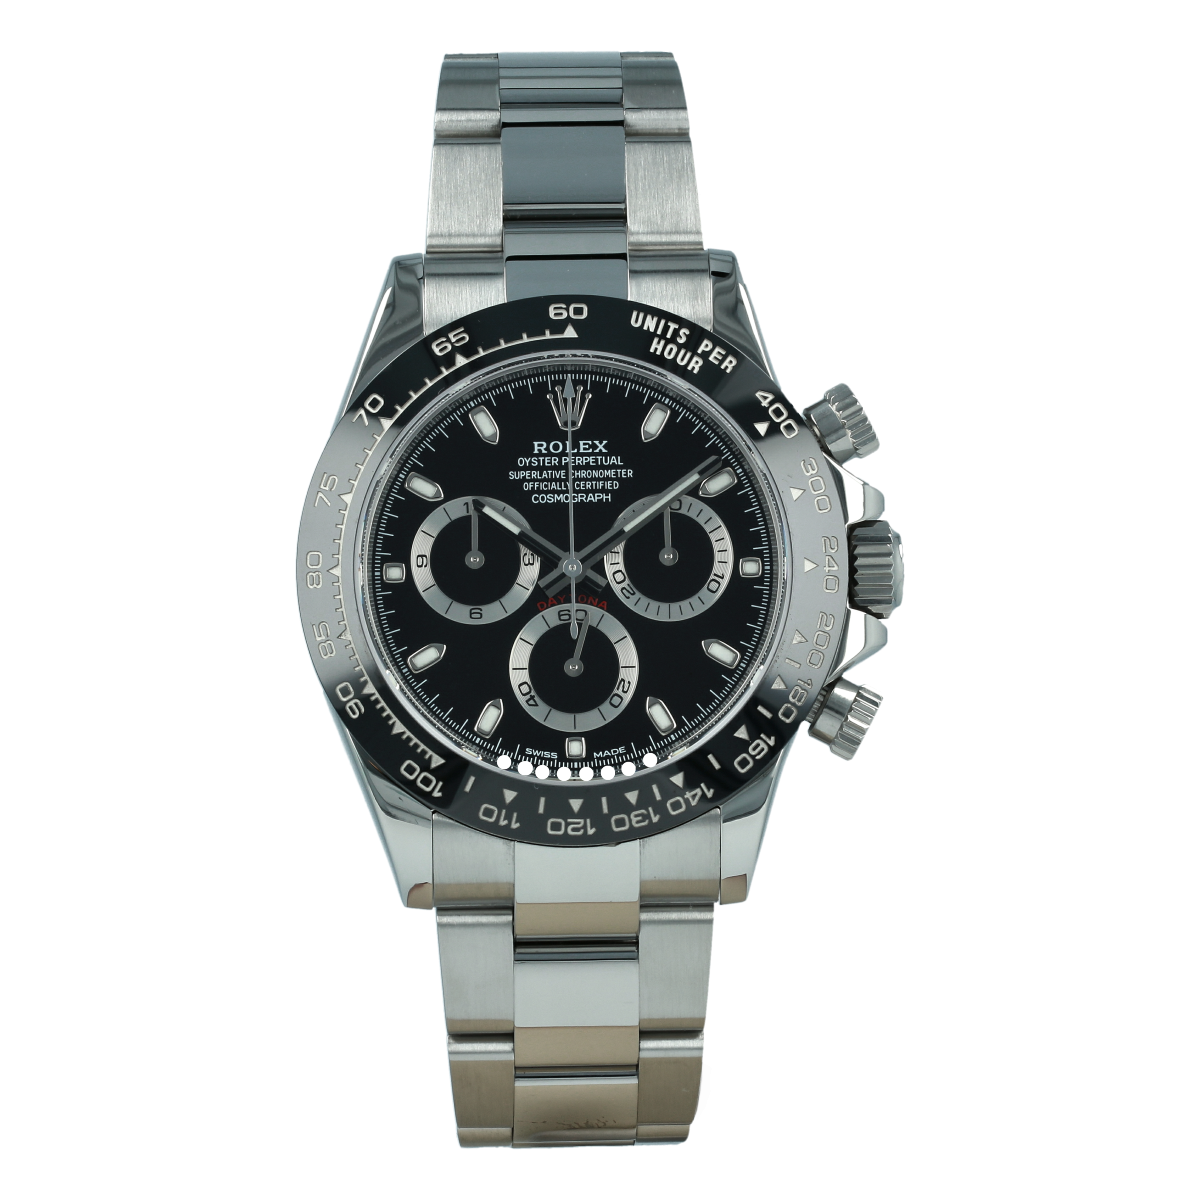 Rolex Cosmograph Daytona 116500LN Black Dial | Buy pre-owned Rolex watch